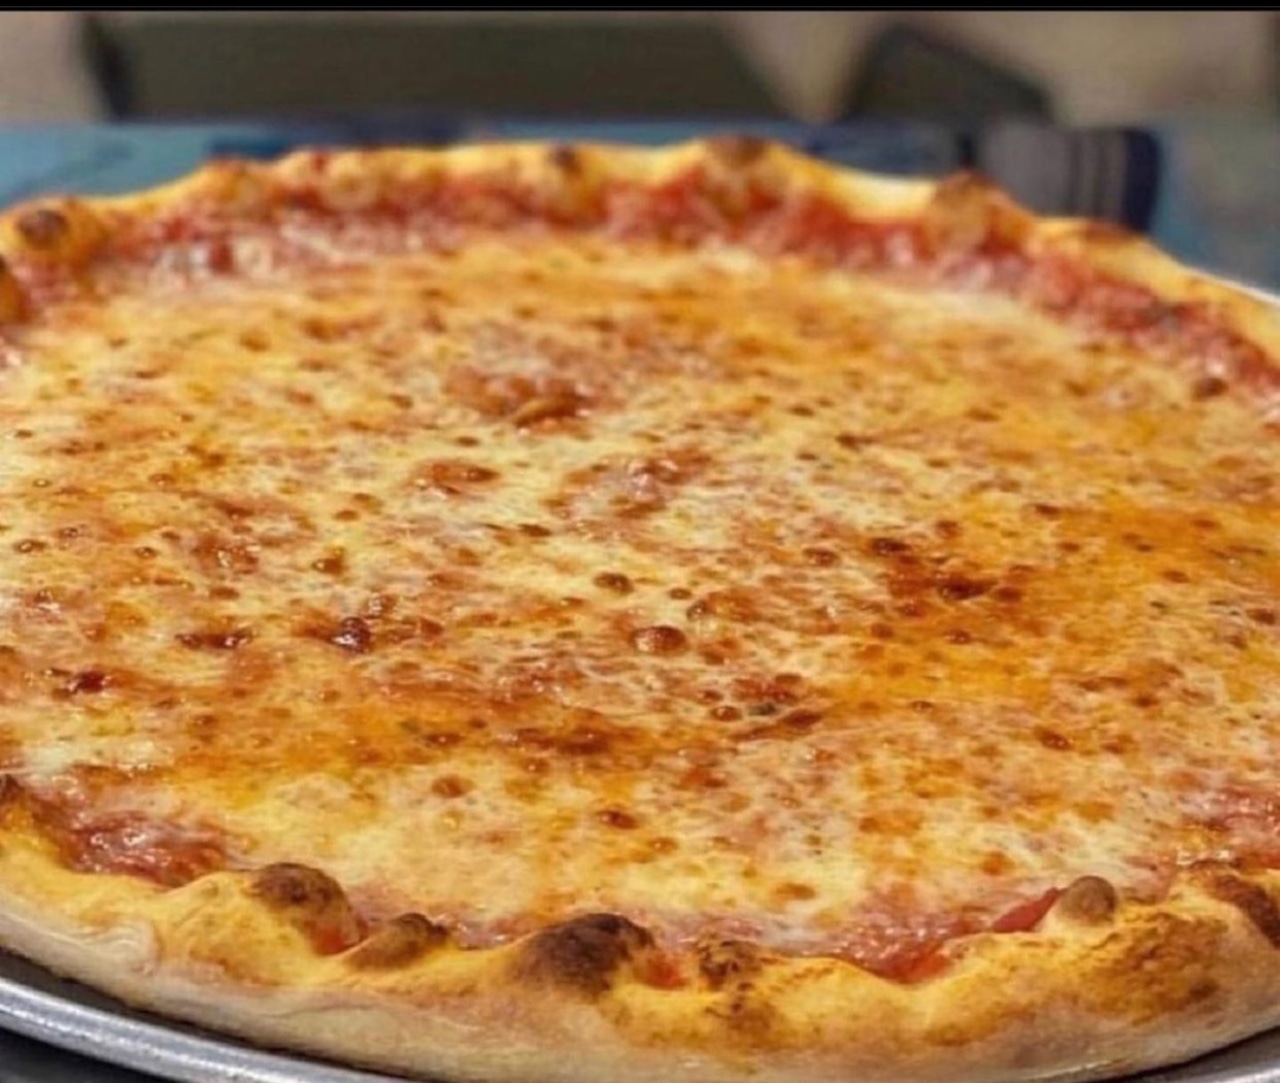 Less pizza, more buzz: Exclusive NYC Italian restaurant serves up just 15 pies per week, says report [Video]